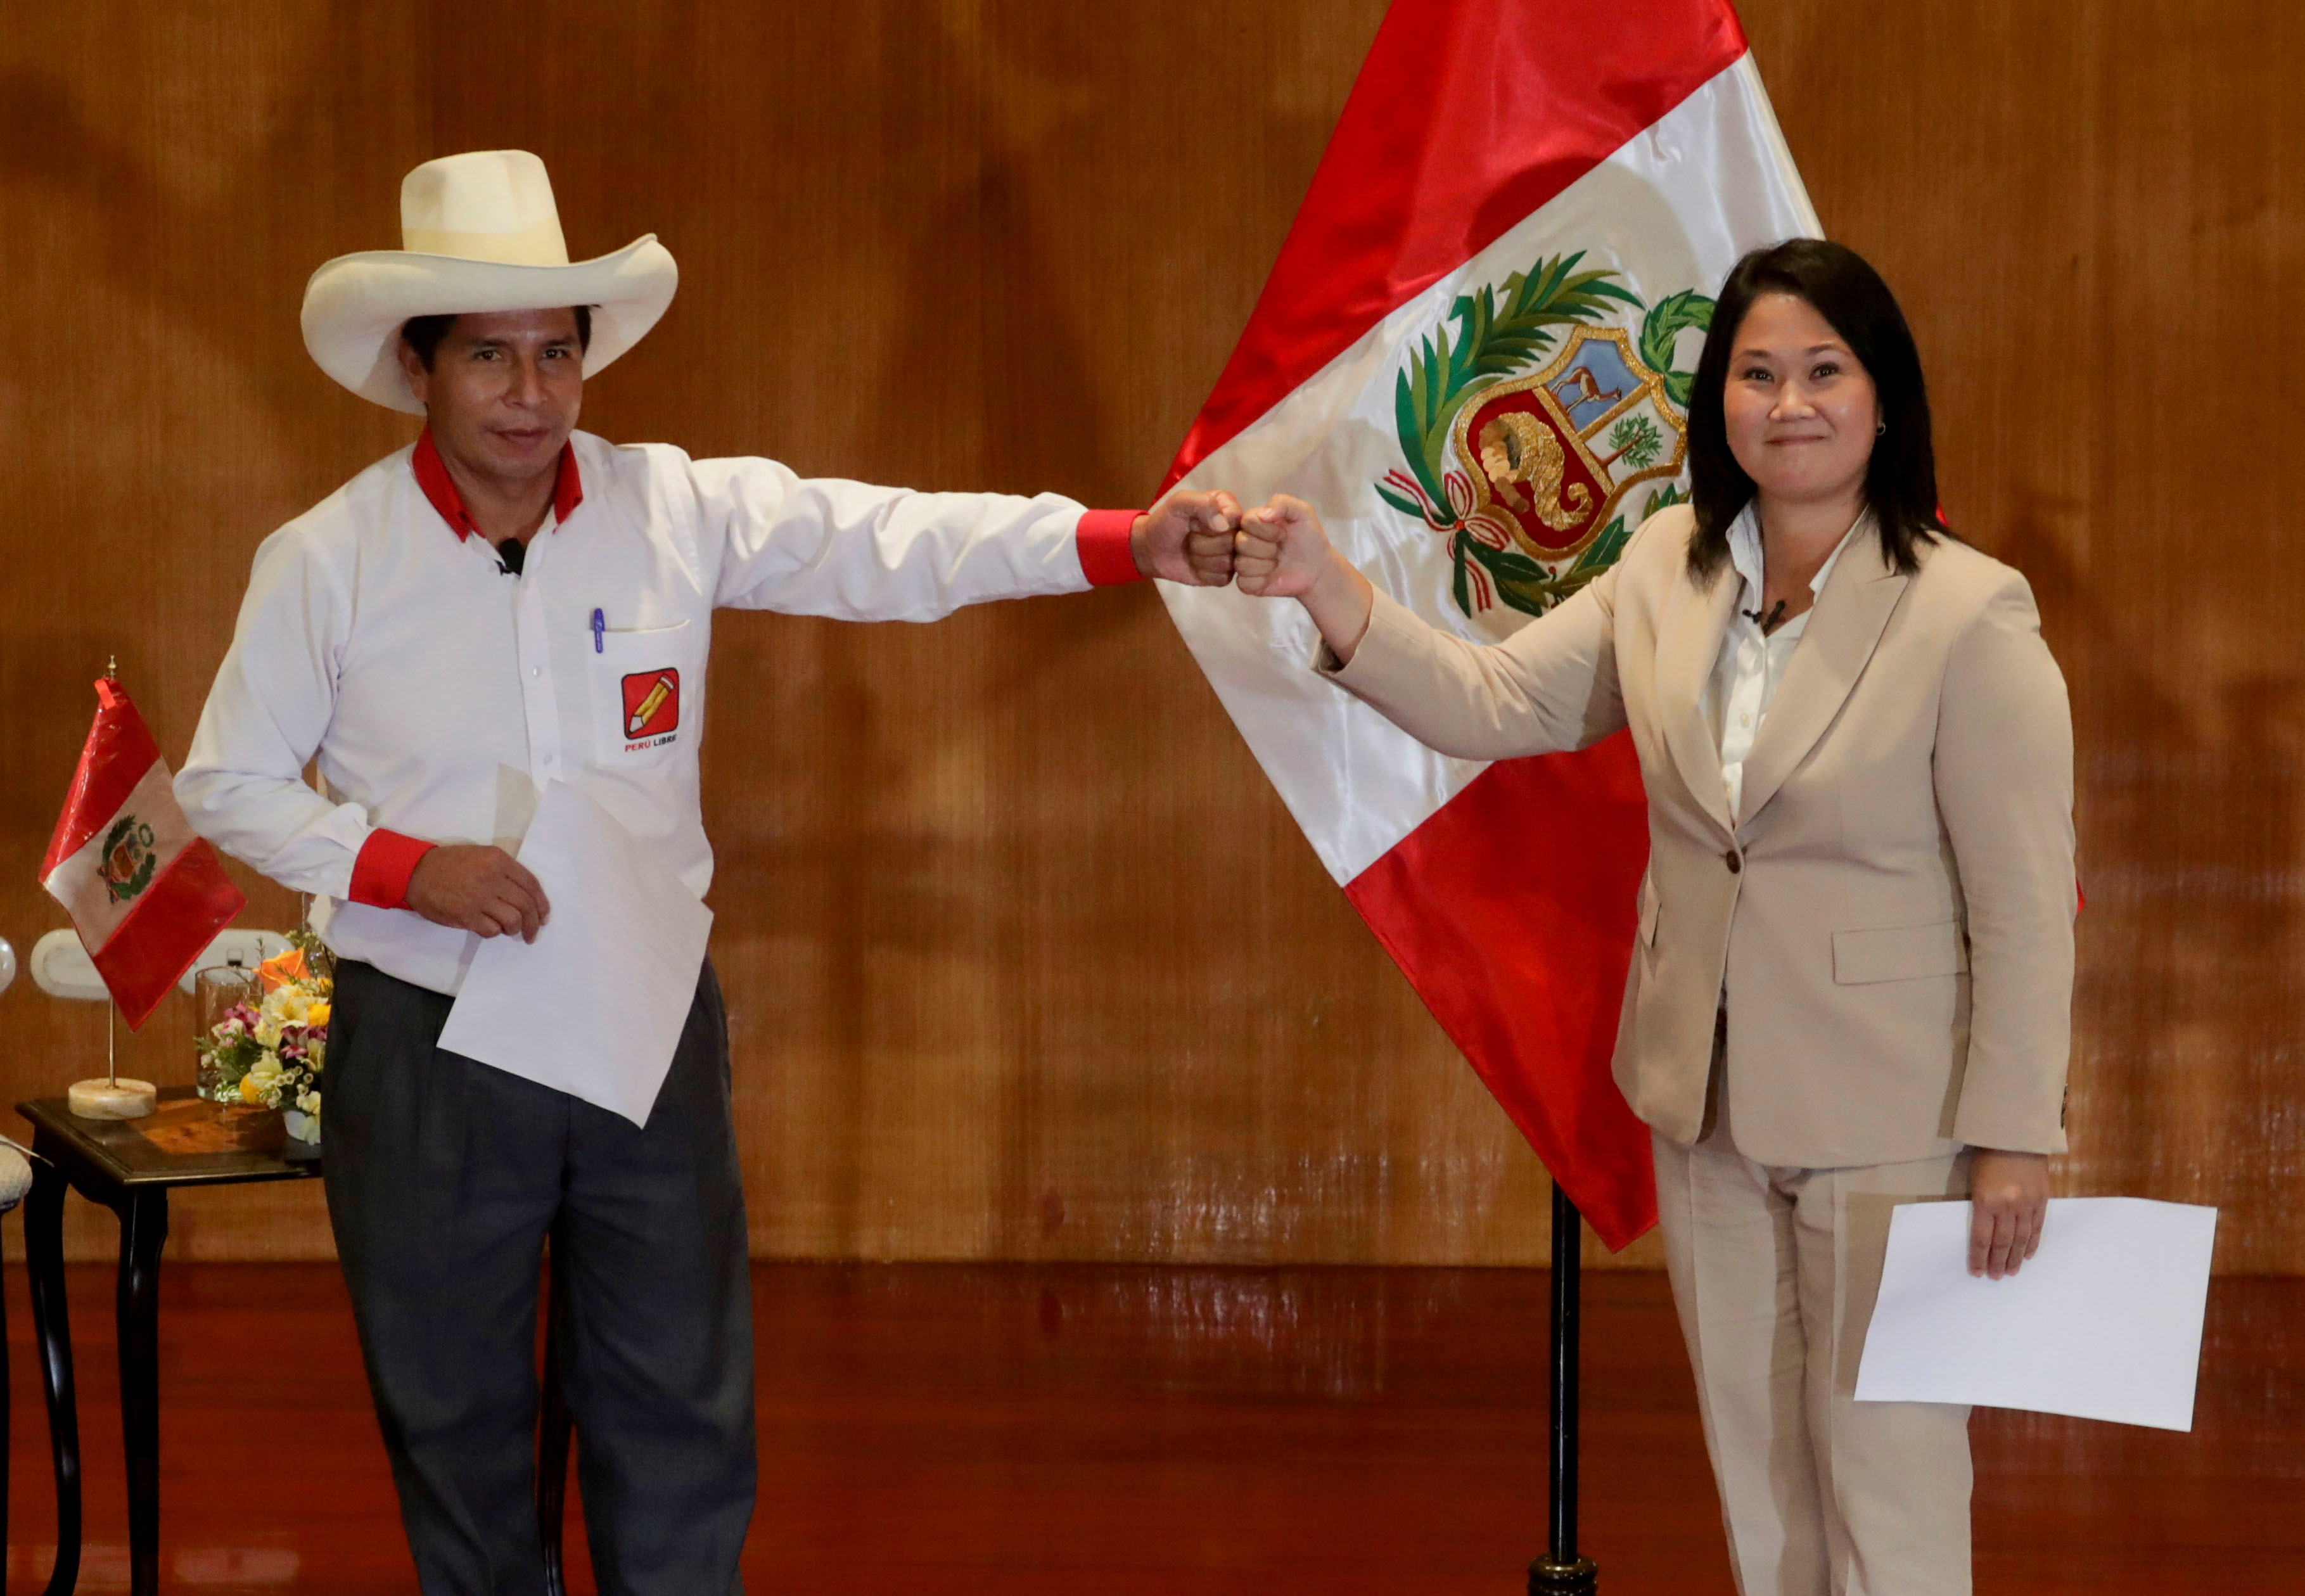 Peruvian presidential candidates Pedro Castillo and Keiko Fujimori, who will face each other in a run-off vote on June 6, gesture, in Lima